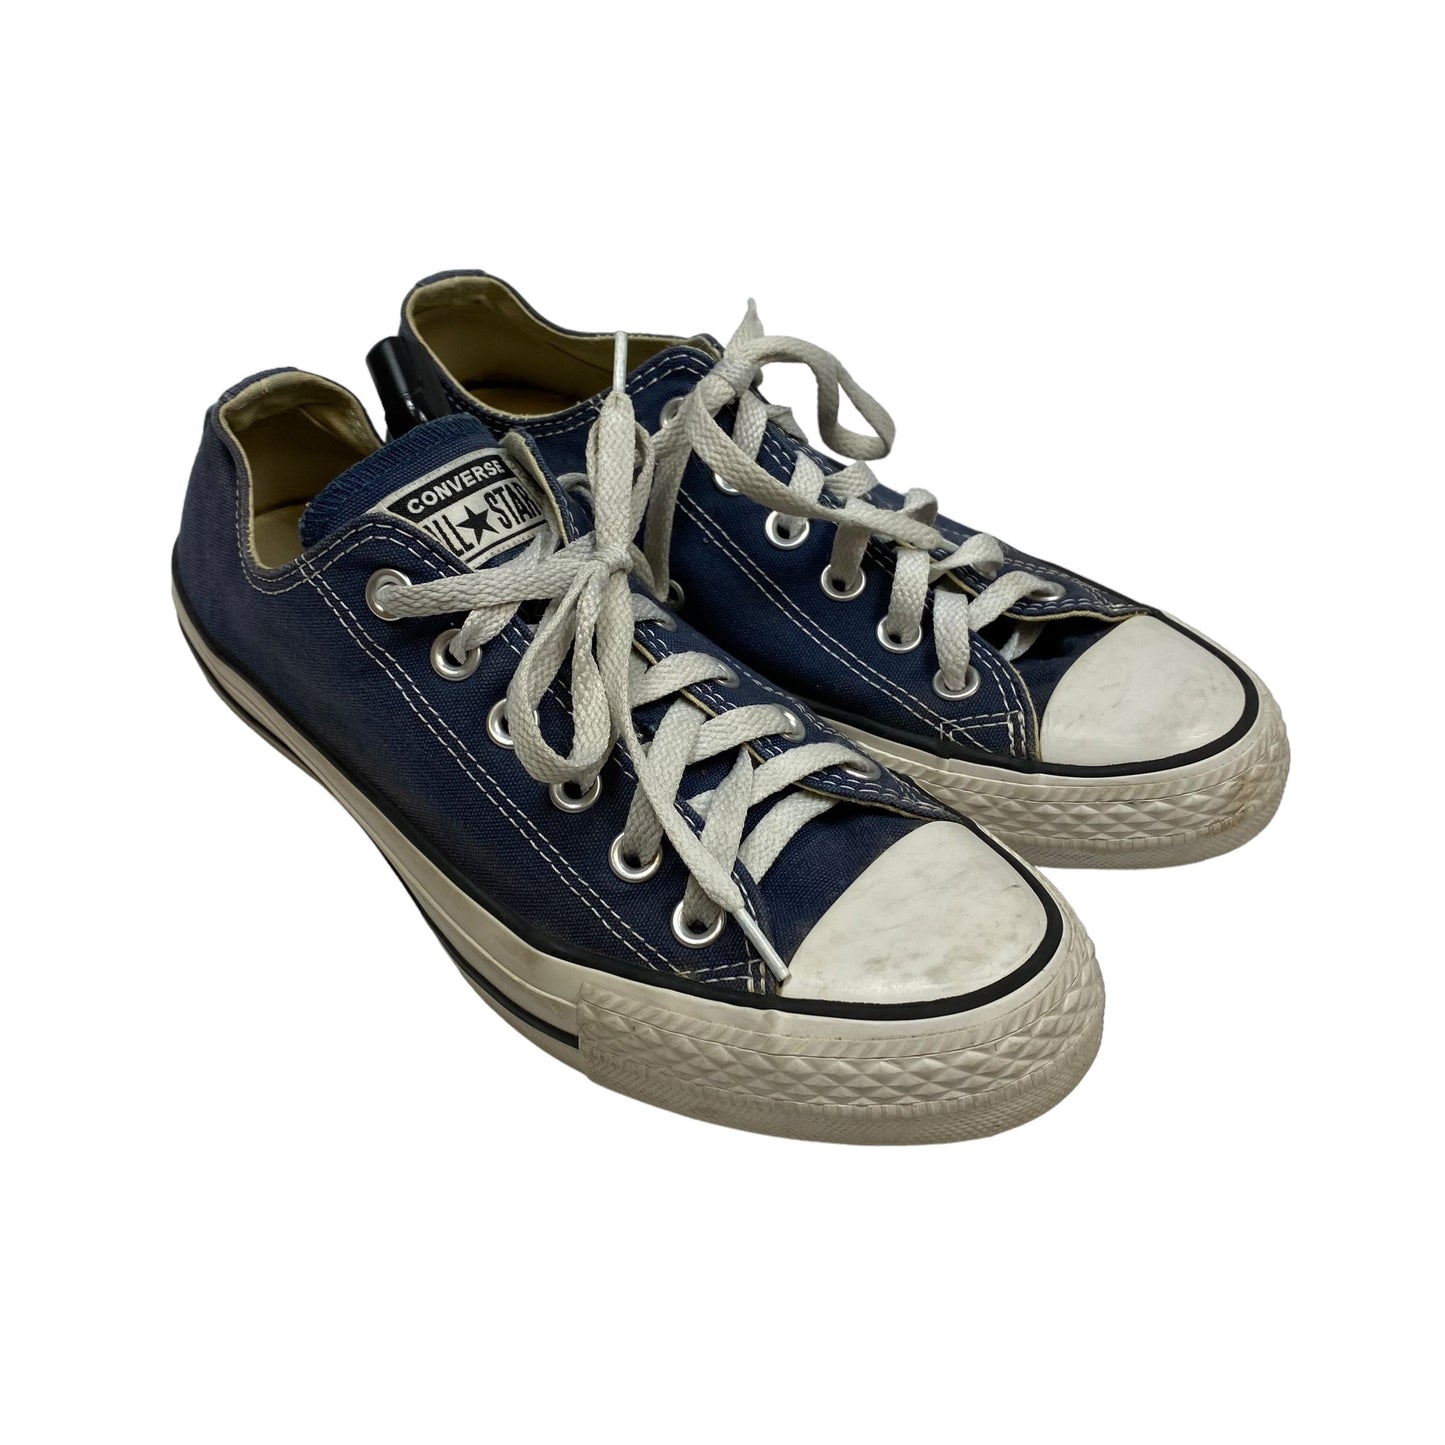 Blue Shoes Sneakers Converse, Size 8